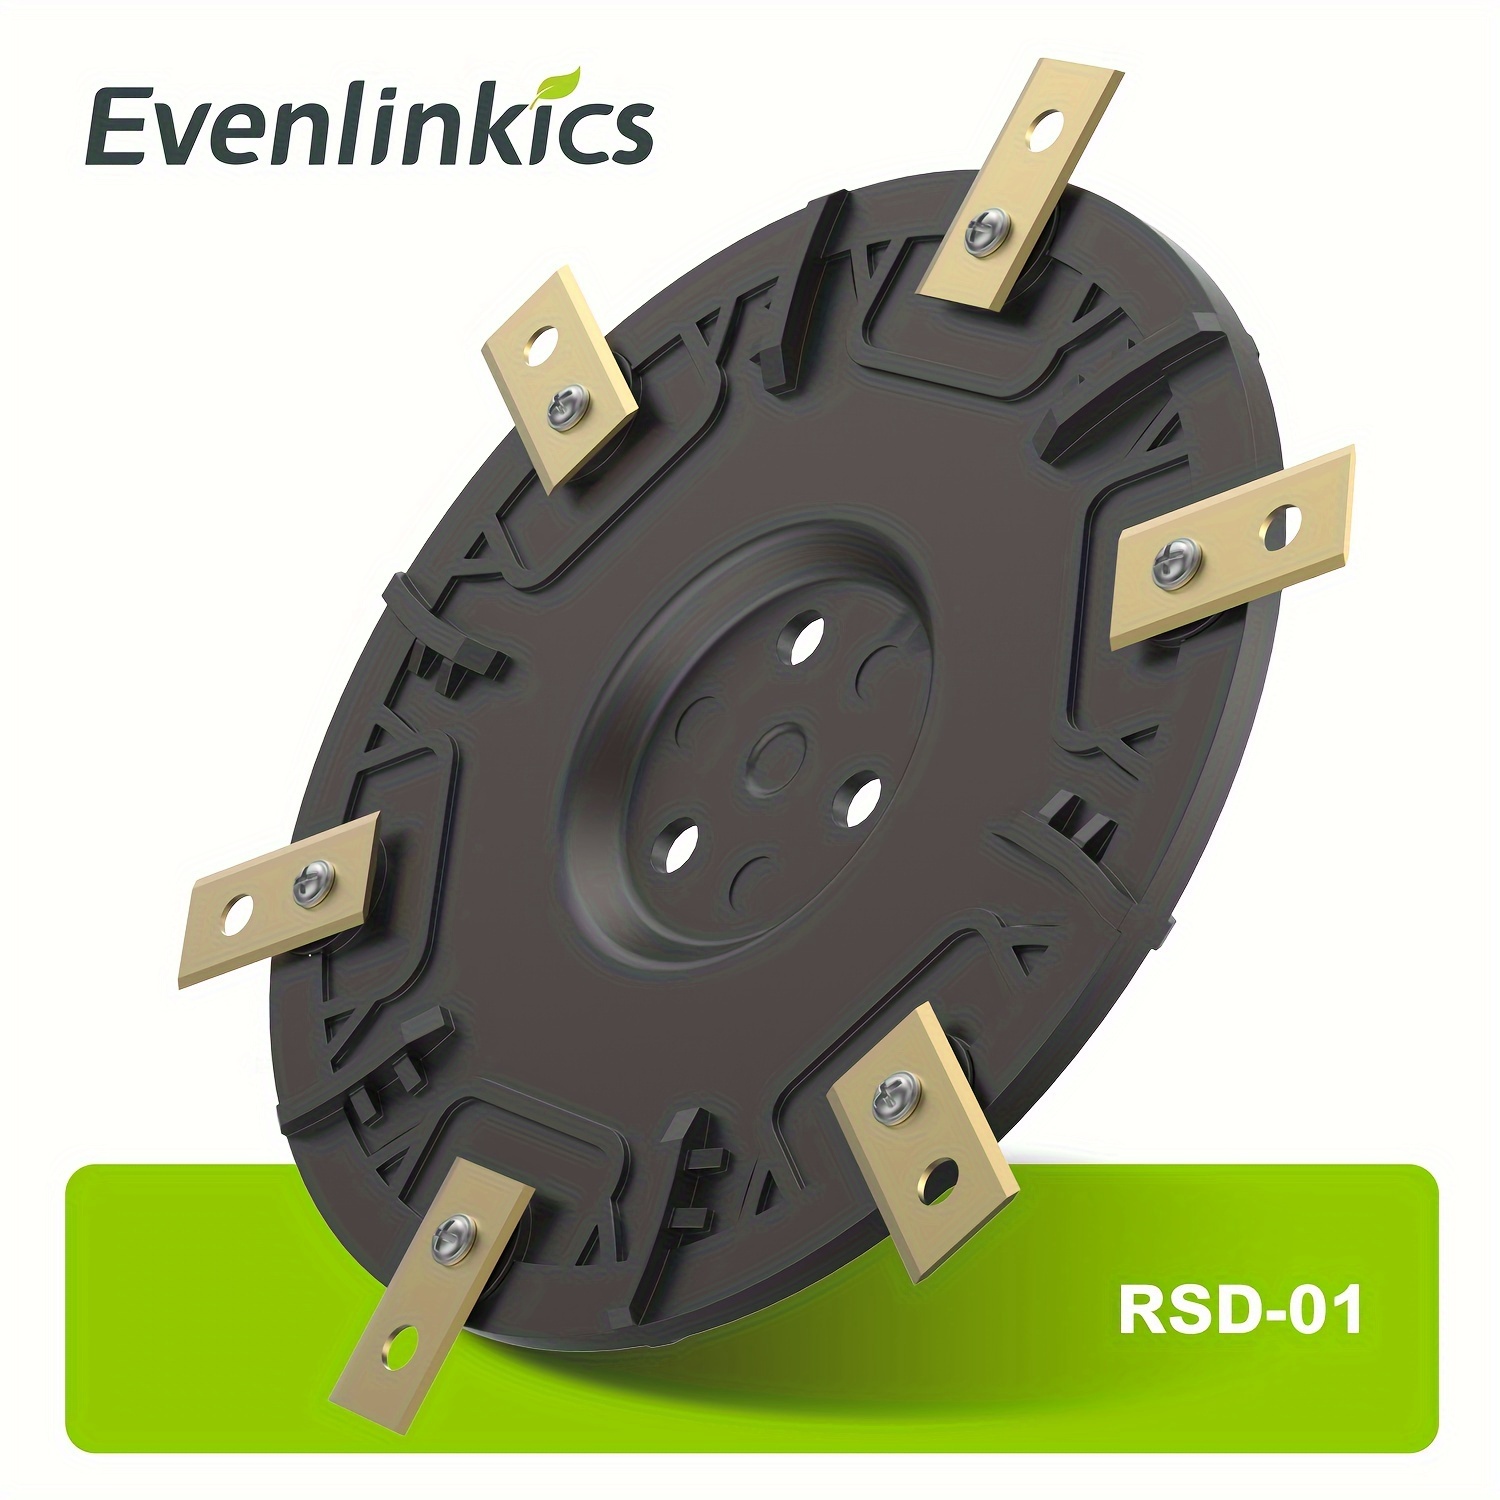 

Evenlinkics Blade Disc Replacement Kit For Landroid S&m (up To 2020), Landxcape, Yardforce, , And Scheppach Robotic Lawnmower - Includes 1 Tuning Knife Plate, 6 Titanium Blades & 6 Screws